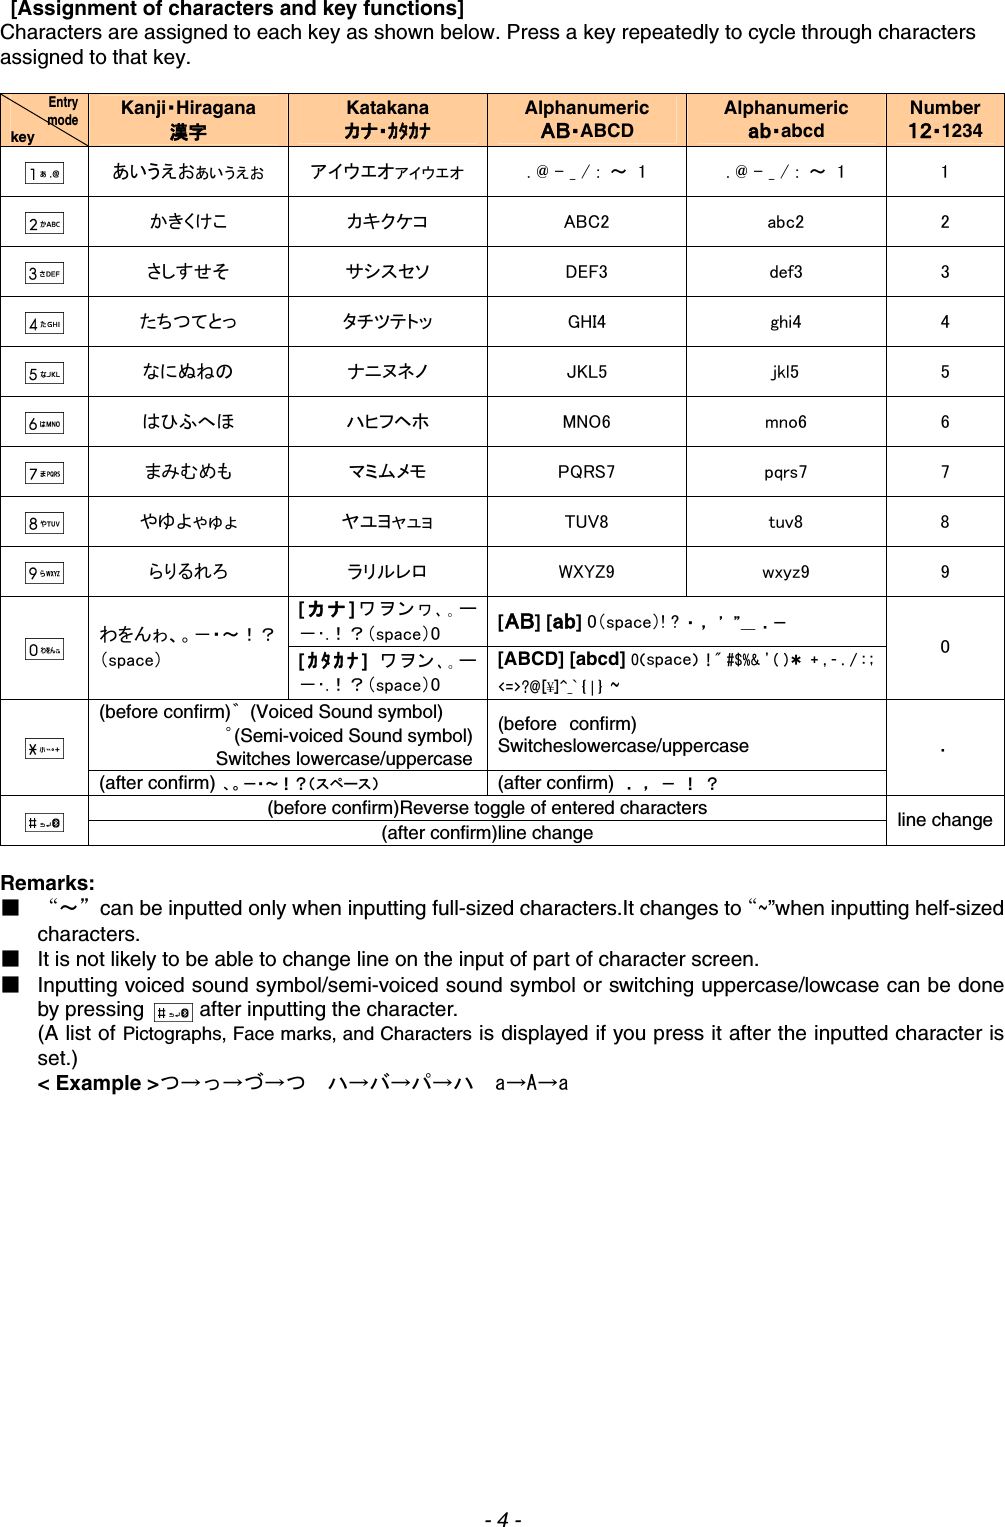    [Assignment of characters and key functions] Characters are assigned to each key as shown below. Press a key repeatedly to cycle through characters assigned to that key.  Entry mode key Kanji・Hiragana 漢字 Katakana カナ・ｶﾀｶﾅ Alphanumeric ＡＢ・ABCD Alphanumeric ａｂ・abcd Number １２・1234  あいうえおぁぃぅぇぉ  アイウエオァィゥェォ  . @ - _ / :  ～  1  . @ - _ / :  ～  1  1  かきくけこ  カキクケコ  ABC2  abc2  2  さしすせそ  サシスセソ  DEF3  def3  3  たちつてとっ  タチツテトッ  GHI4  ghi4  4  なにぬねの  ナニヌネノ  JKL5  jkl5  5  はひふへほ  ハヒフヘホ  MNO6  mno6  6  まみむめも  マミムメモ  PQRS7  pqrs7  7  やゆよゃゅょ  ヤユヨャュョ  TUV8  tuv8  8  らりるれろ  ラリルレロ  WXYZ9  wxyz9  9 [カナ]ワヲンヮ､｡ー－･.！？（space）0  [ＡＢ] [ａｂ] 0（space）! ? ・ ， ’ ”＿ ．－  わをんゎ、。－・～！？（space）  [ｶﾀｶﾅ]  ワヲン､｡ー－･.！？（space）0 [ABCD] [abcd] 0（space）  ! &quot; #$%&amp; &apos; ( )＊ + , - . / : ; &lt;=&gt;?@[¥]^_` { | } ～ 0 (before confirm)゛  (Voiced Sound symbol)           ゜(Semi-voiced Sound symbol)         Switches lowercase/uppercase(before confirm) Switcheslowercase/uppercase  (after confirm)  、。－・～！？（スペース） (after confirm) ．  ，  －  ！  ？ ． (before confirm)Reverse toggle of entered characters  (after confirm)line change    line change Remarks: ■  “～”can be inputted only when inputting full-sized characters.It changes to“～”when inputting helf-sized characters.  ■  It is not likely to be able to change line on the input of part of character screen. ■  Inputting voiced sound symbol/semi-voiced sound symbol or switching uppercase/lowcase can be done by pressing    after inputting the character. (A list of Pictographs, Face marks, and Characters is displayed if you press it after the inputted character is set.) &lt; Example &gt;つ→っ→づ→つ  ハ→バ→パ→ハ  a→A→a    - 4 - 